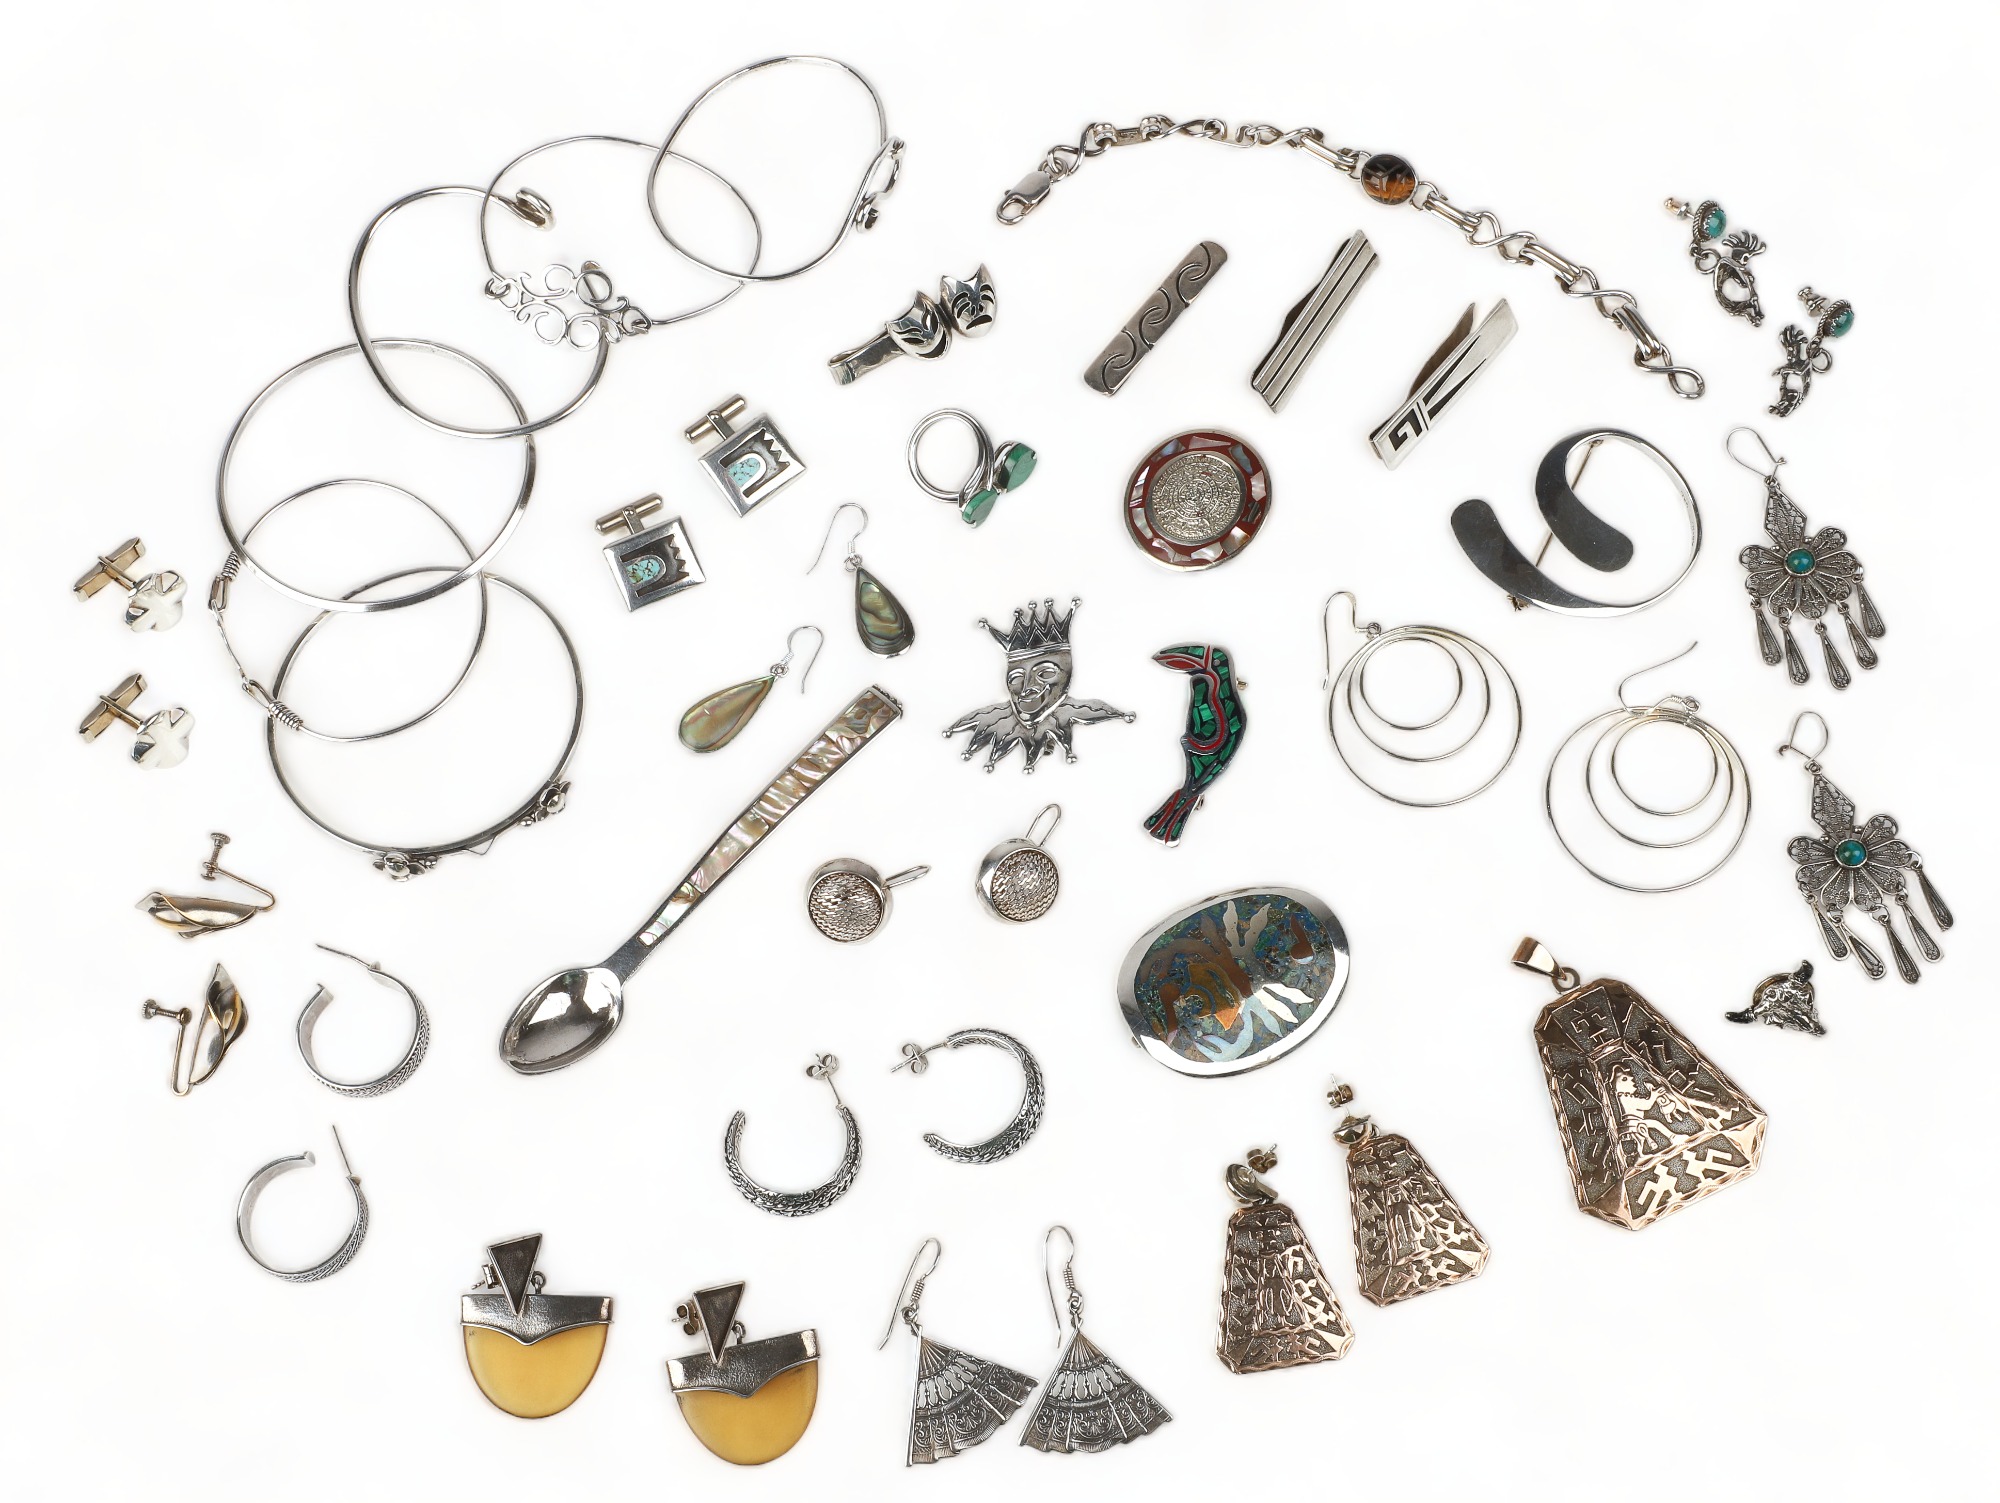 Eclectic sterling jewelry group 3c6765